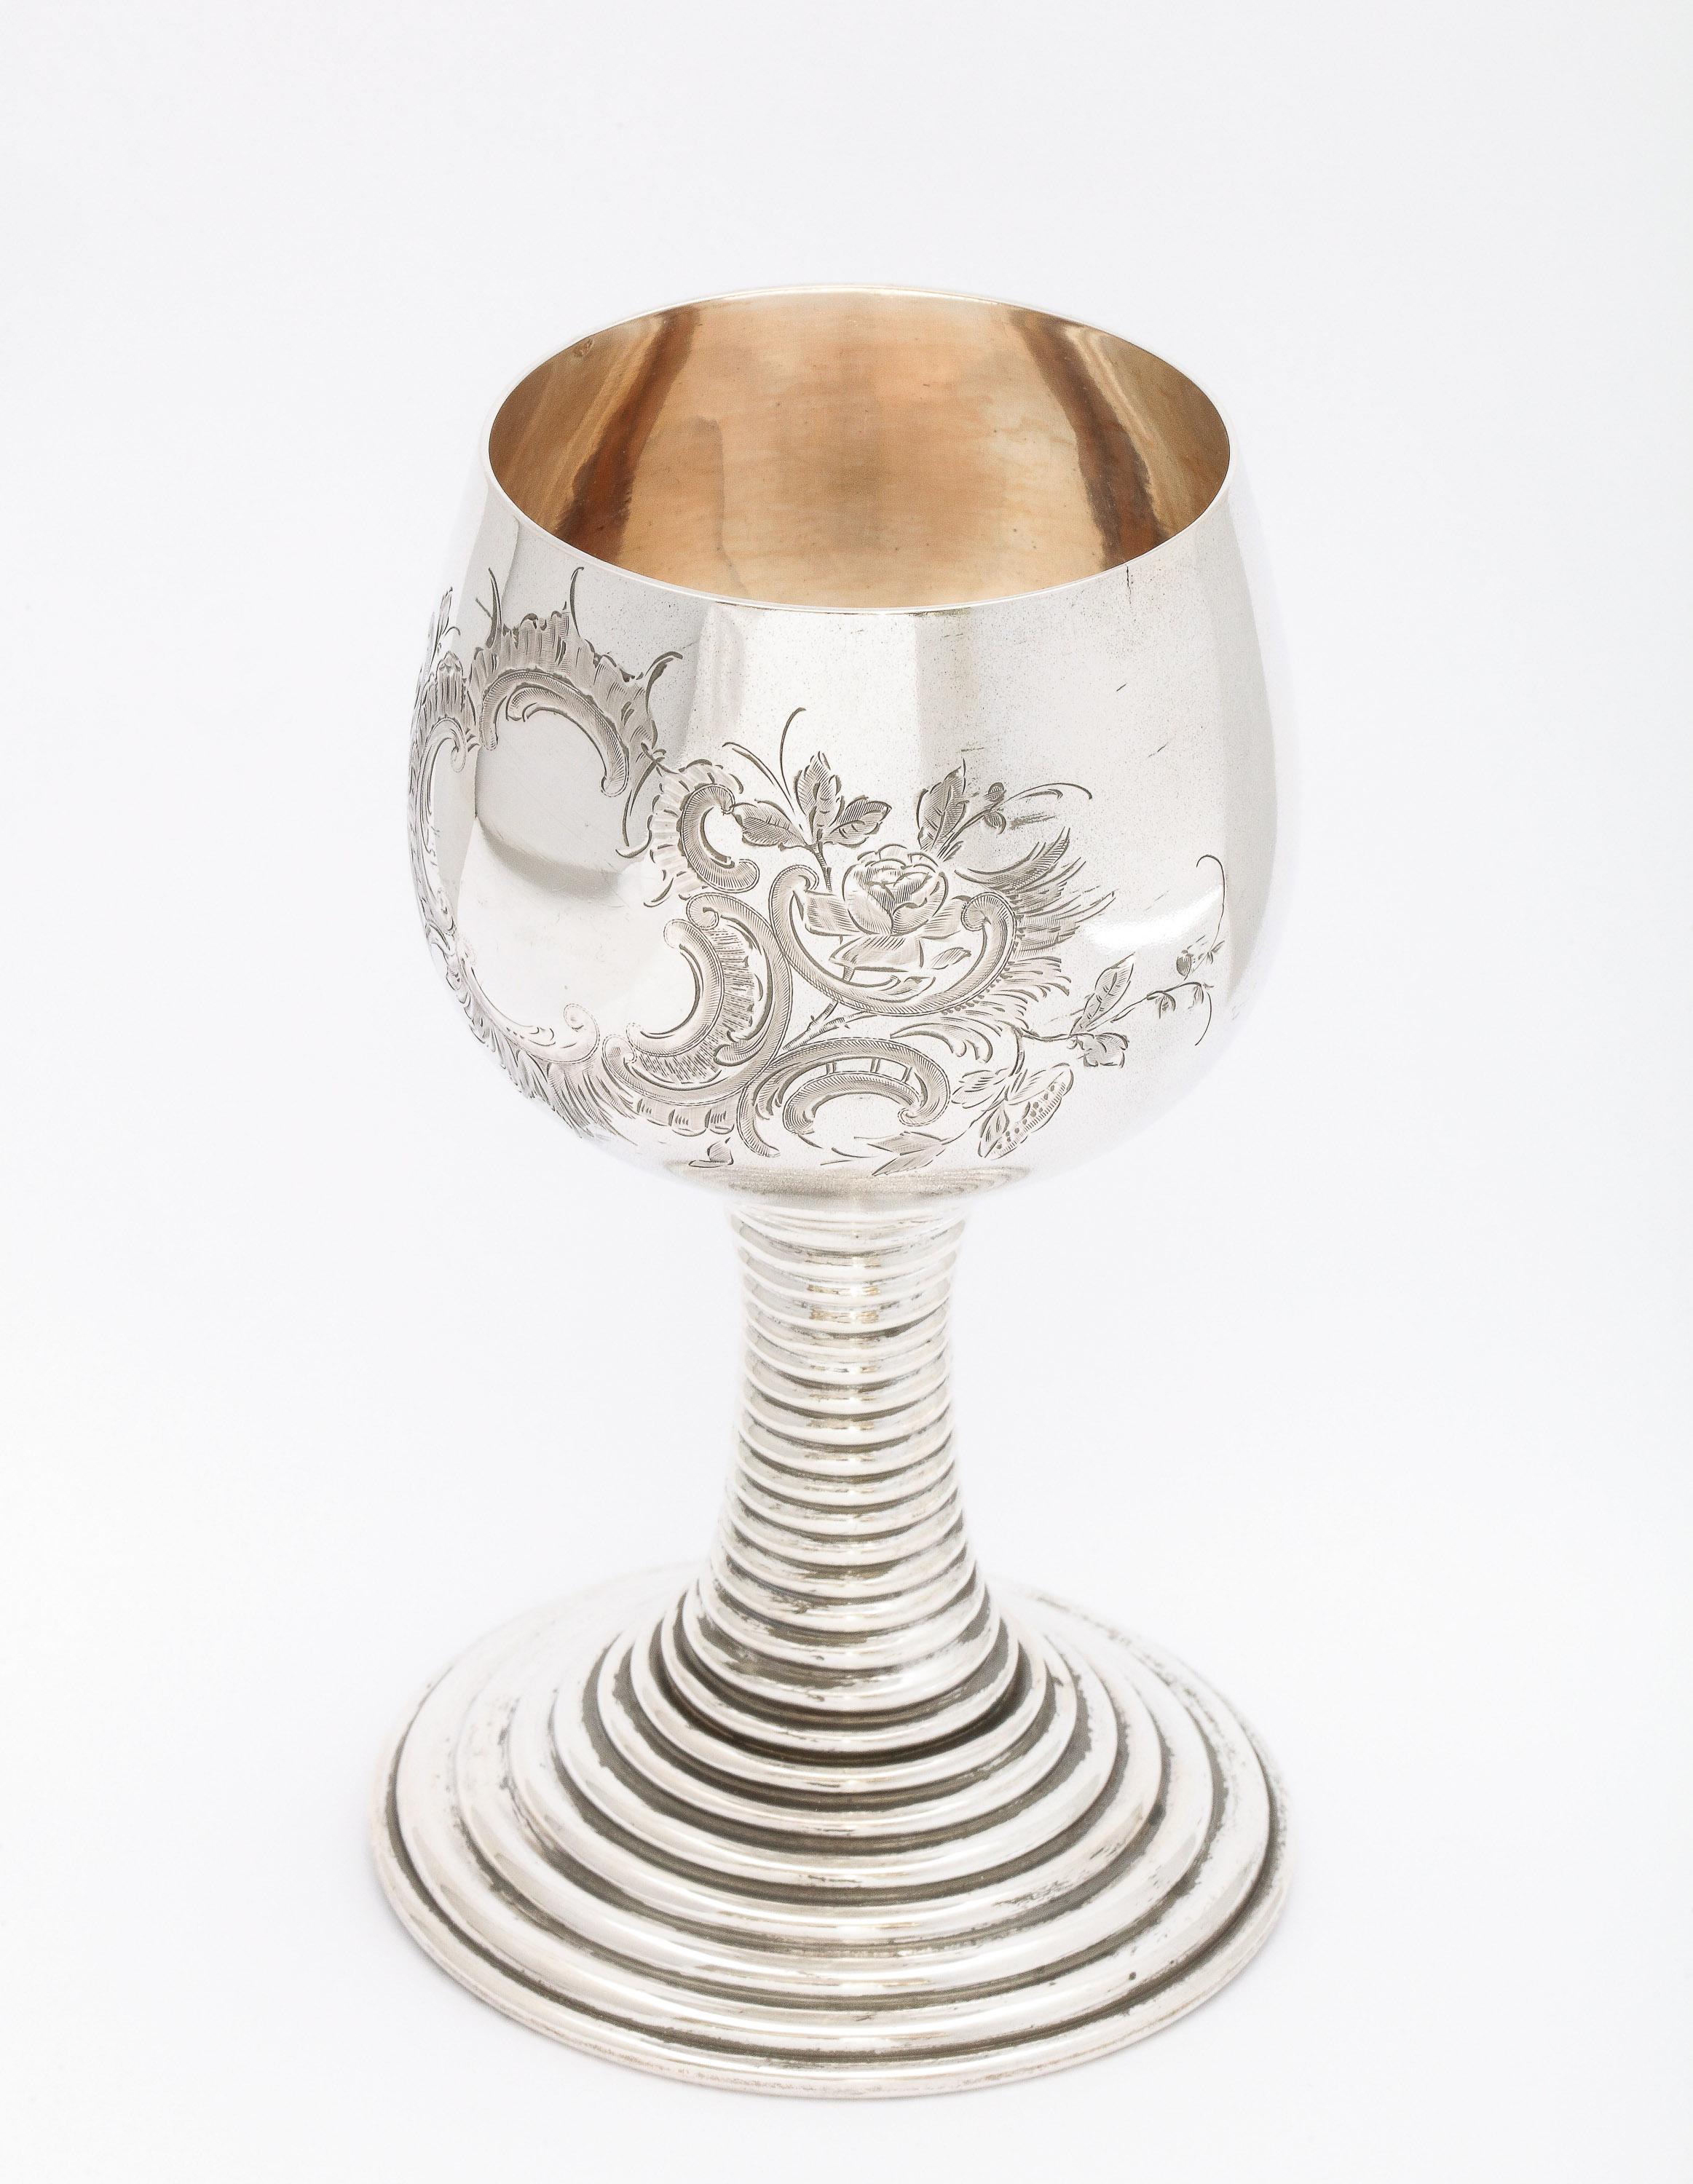 Medieval/15th Century-Style Continental Silver '.800' Roemer/ Rummer Goblet For Sale 4